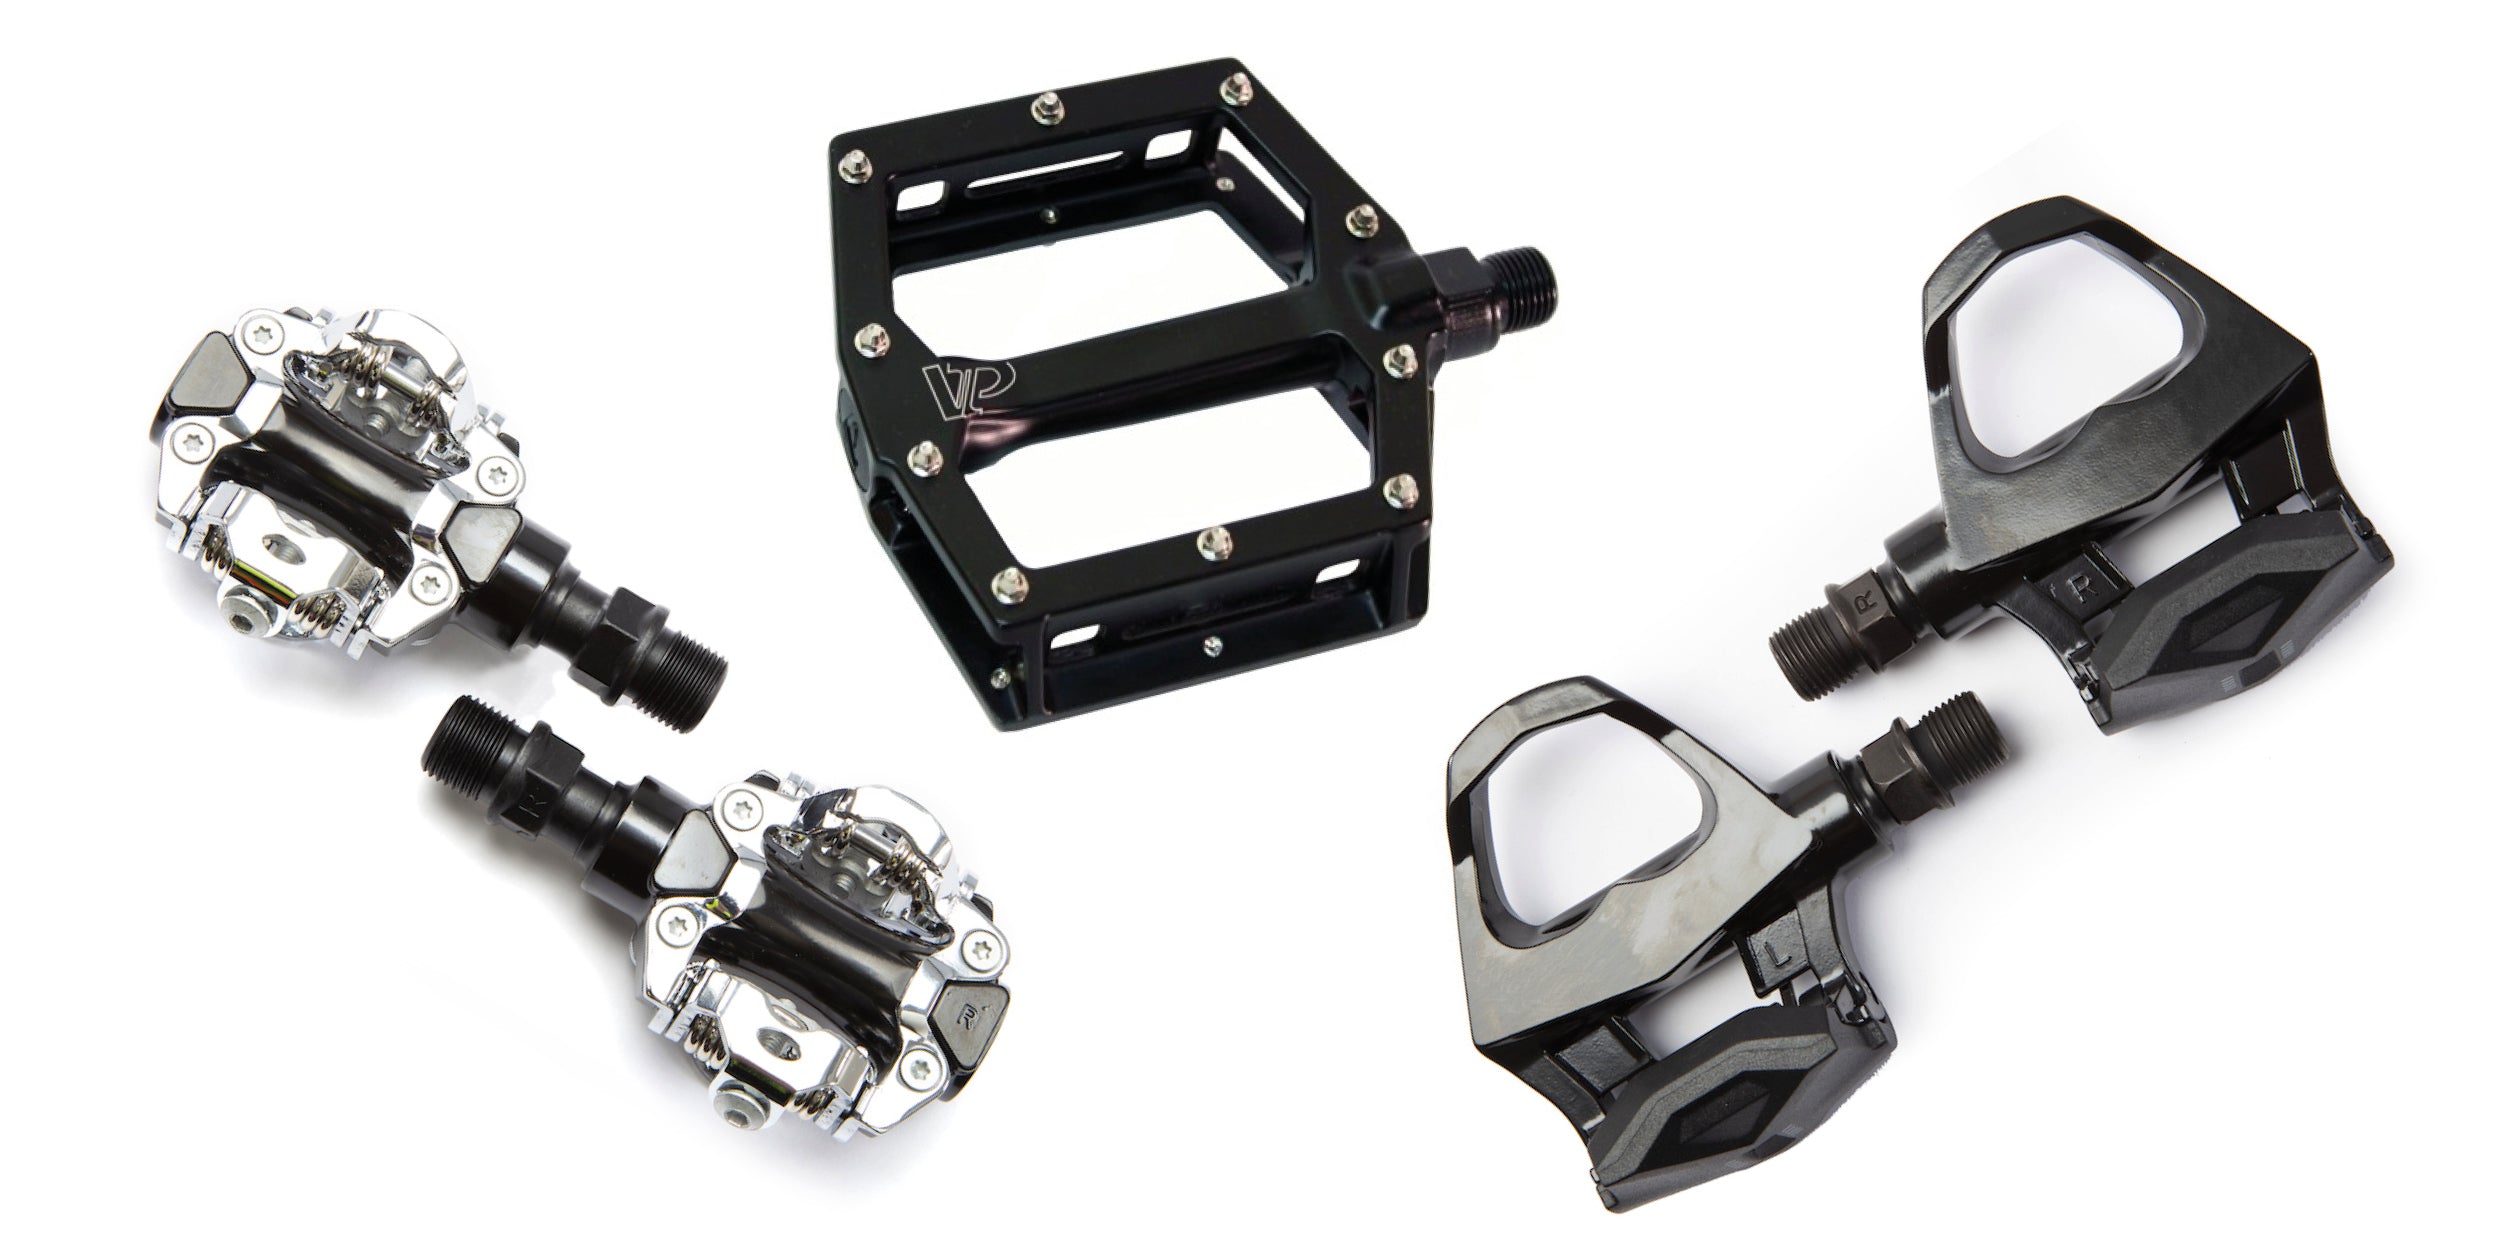 Different types of bike pedals on a white background